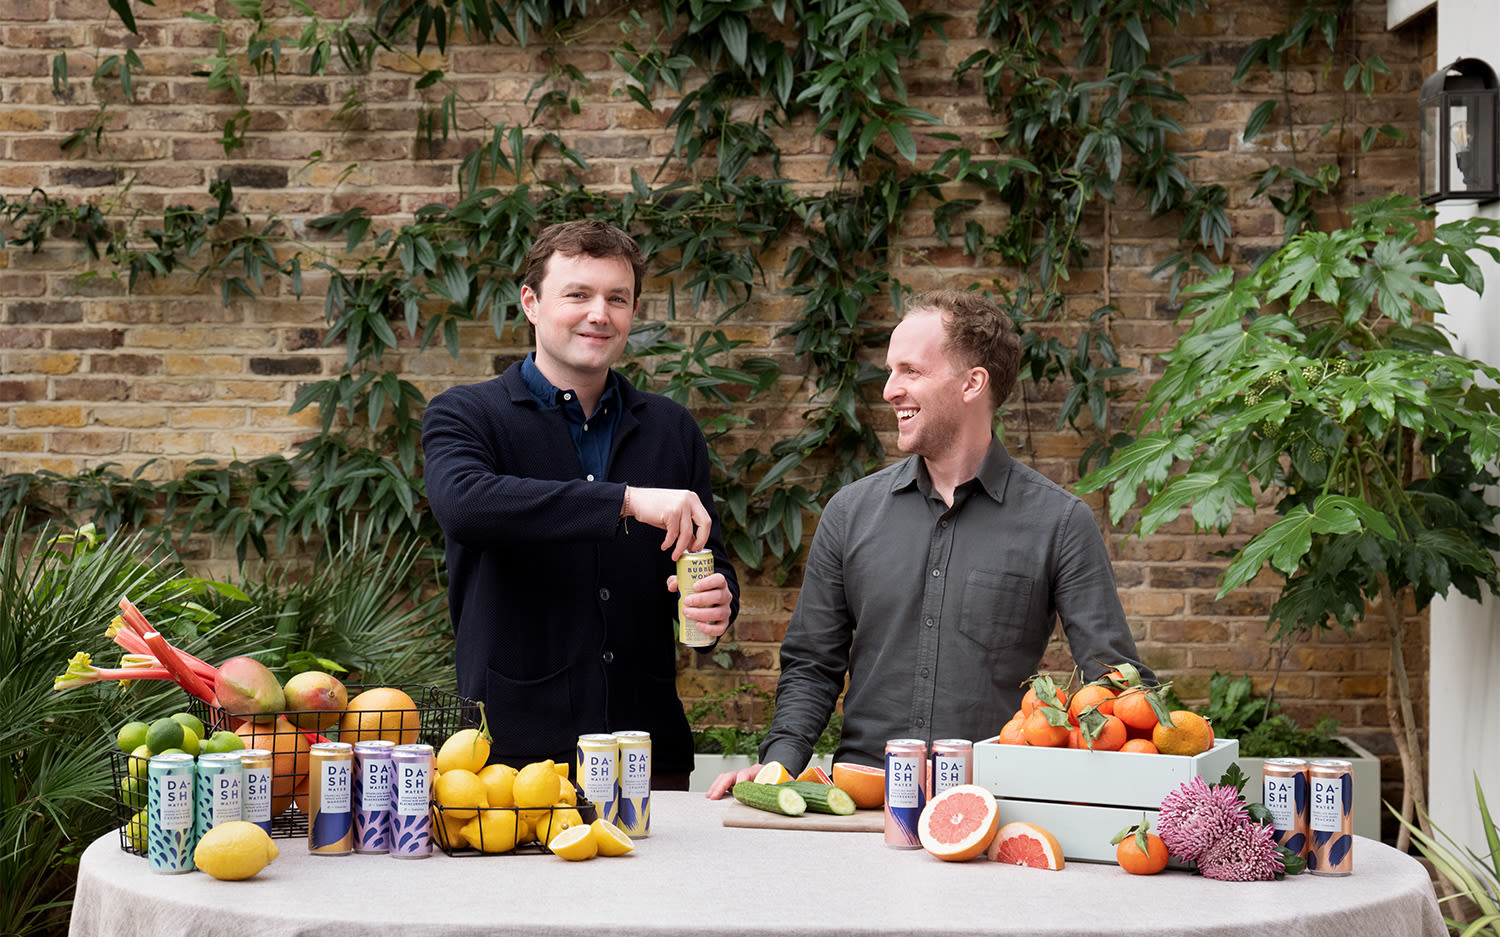 Jack Scott and Alex Wright, co-founders of Dash Water, stand behind a table that has fruits including lemons, grapefruits and rhubarb, and colourful cans of Dash Water on it